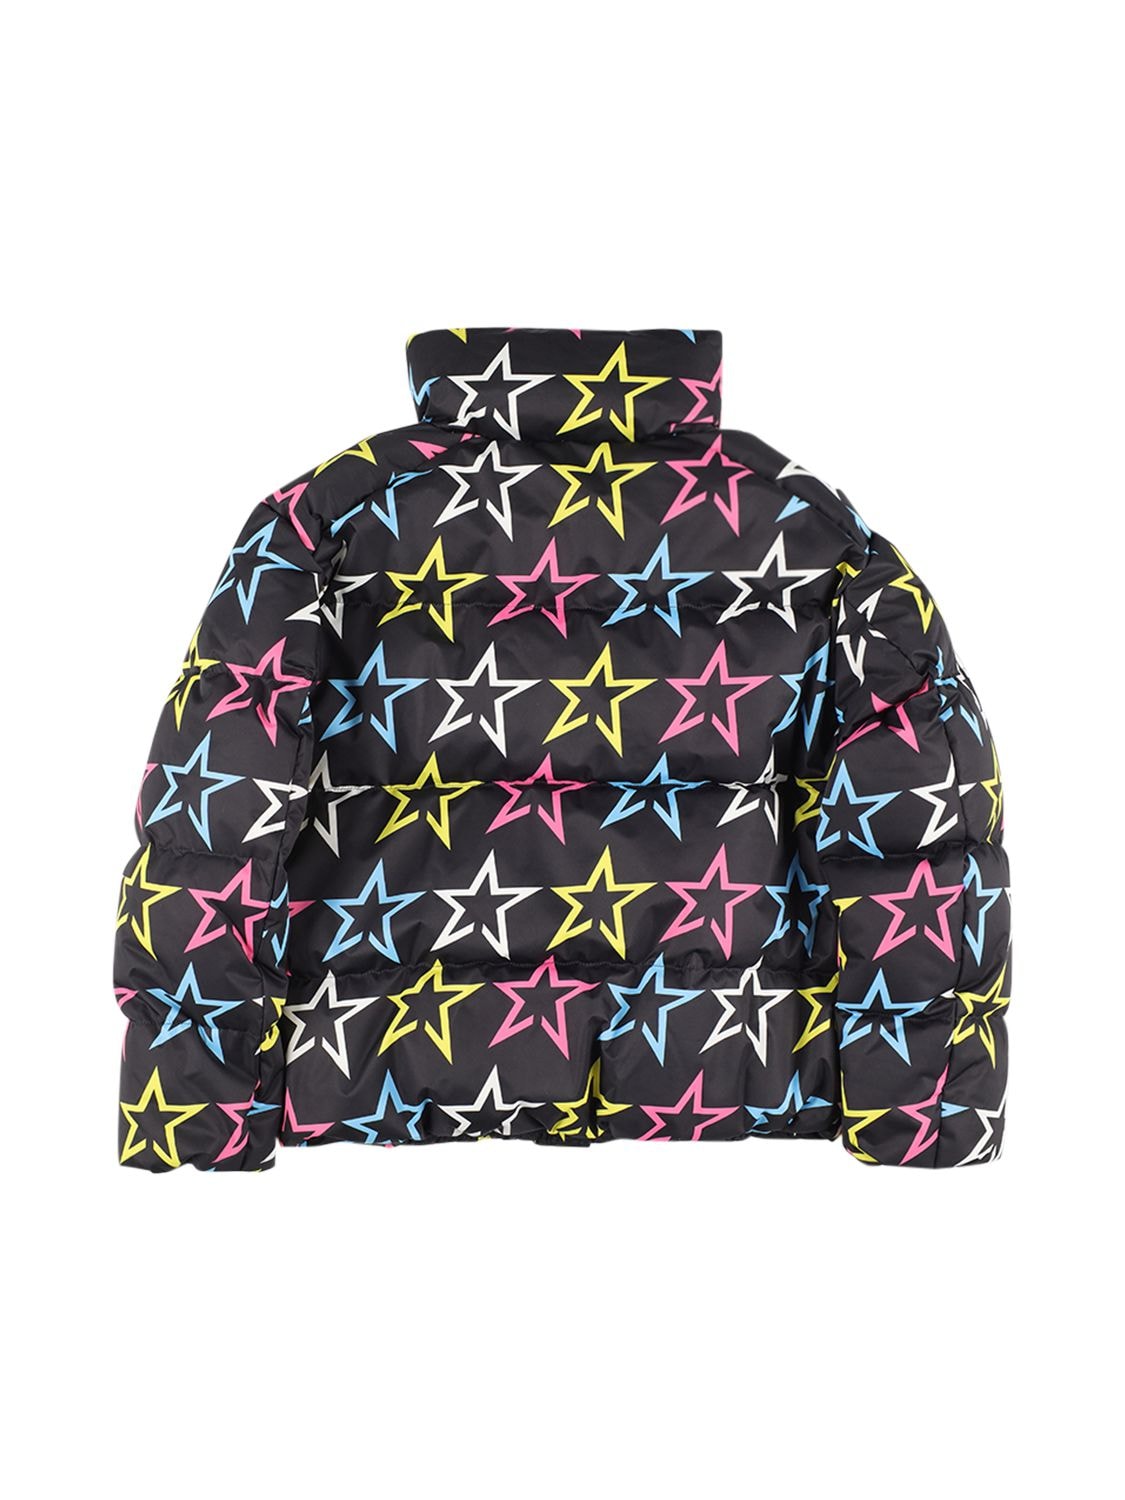 Nuuk Printed Down Ski Jacket in Multicoloured - Perfect Moment Kids